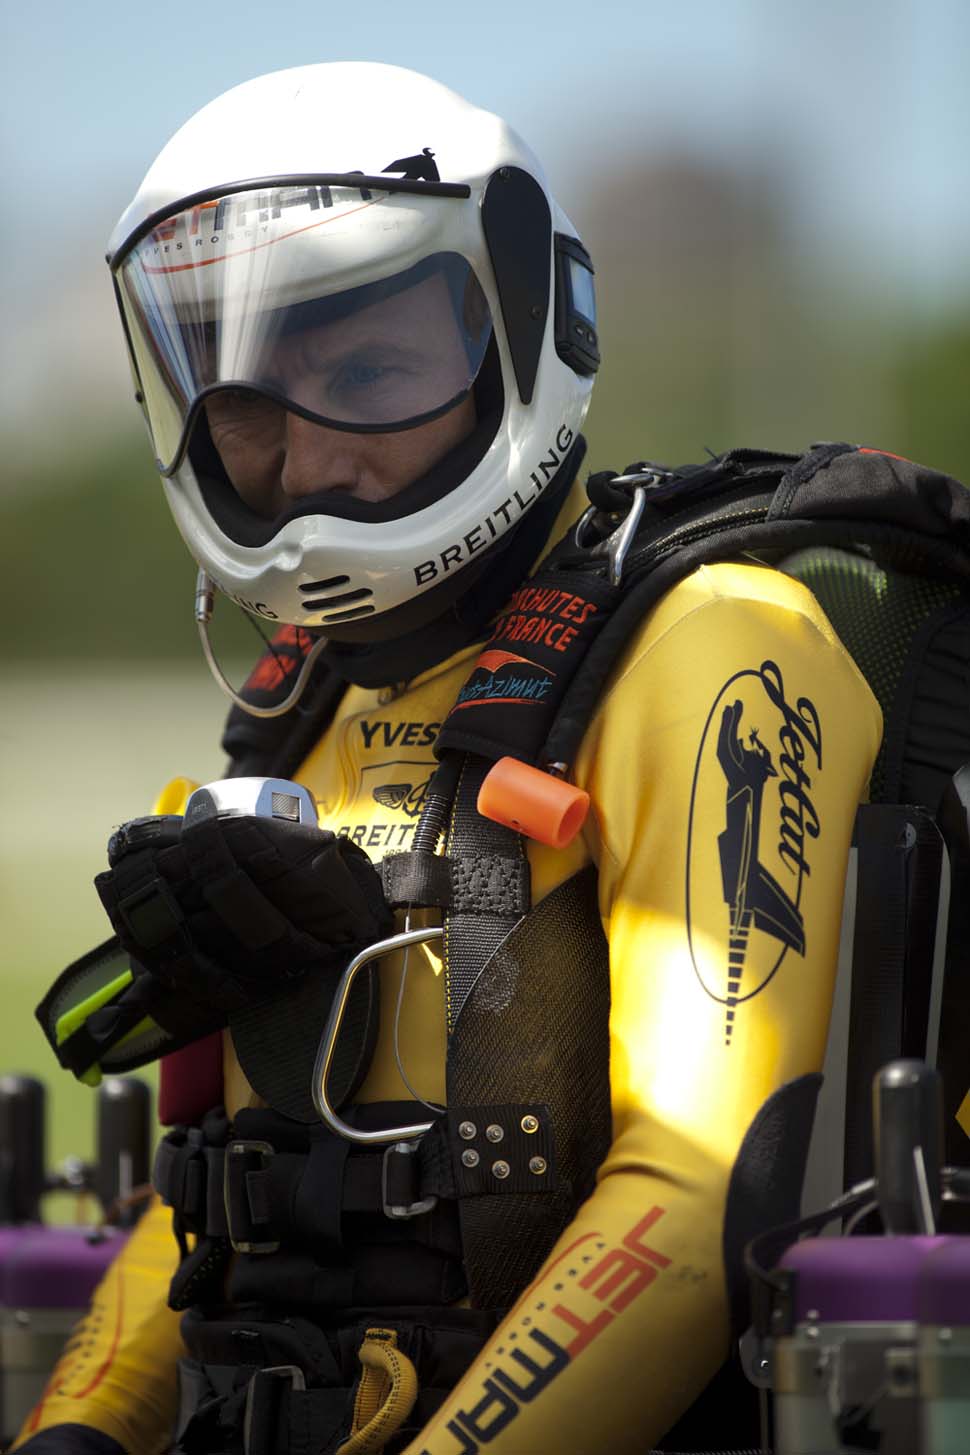 Flying High: Jetman Talks Flight, Fear, And What’s Next